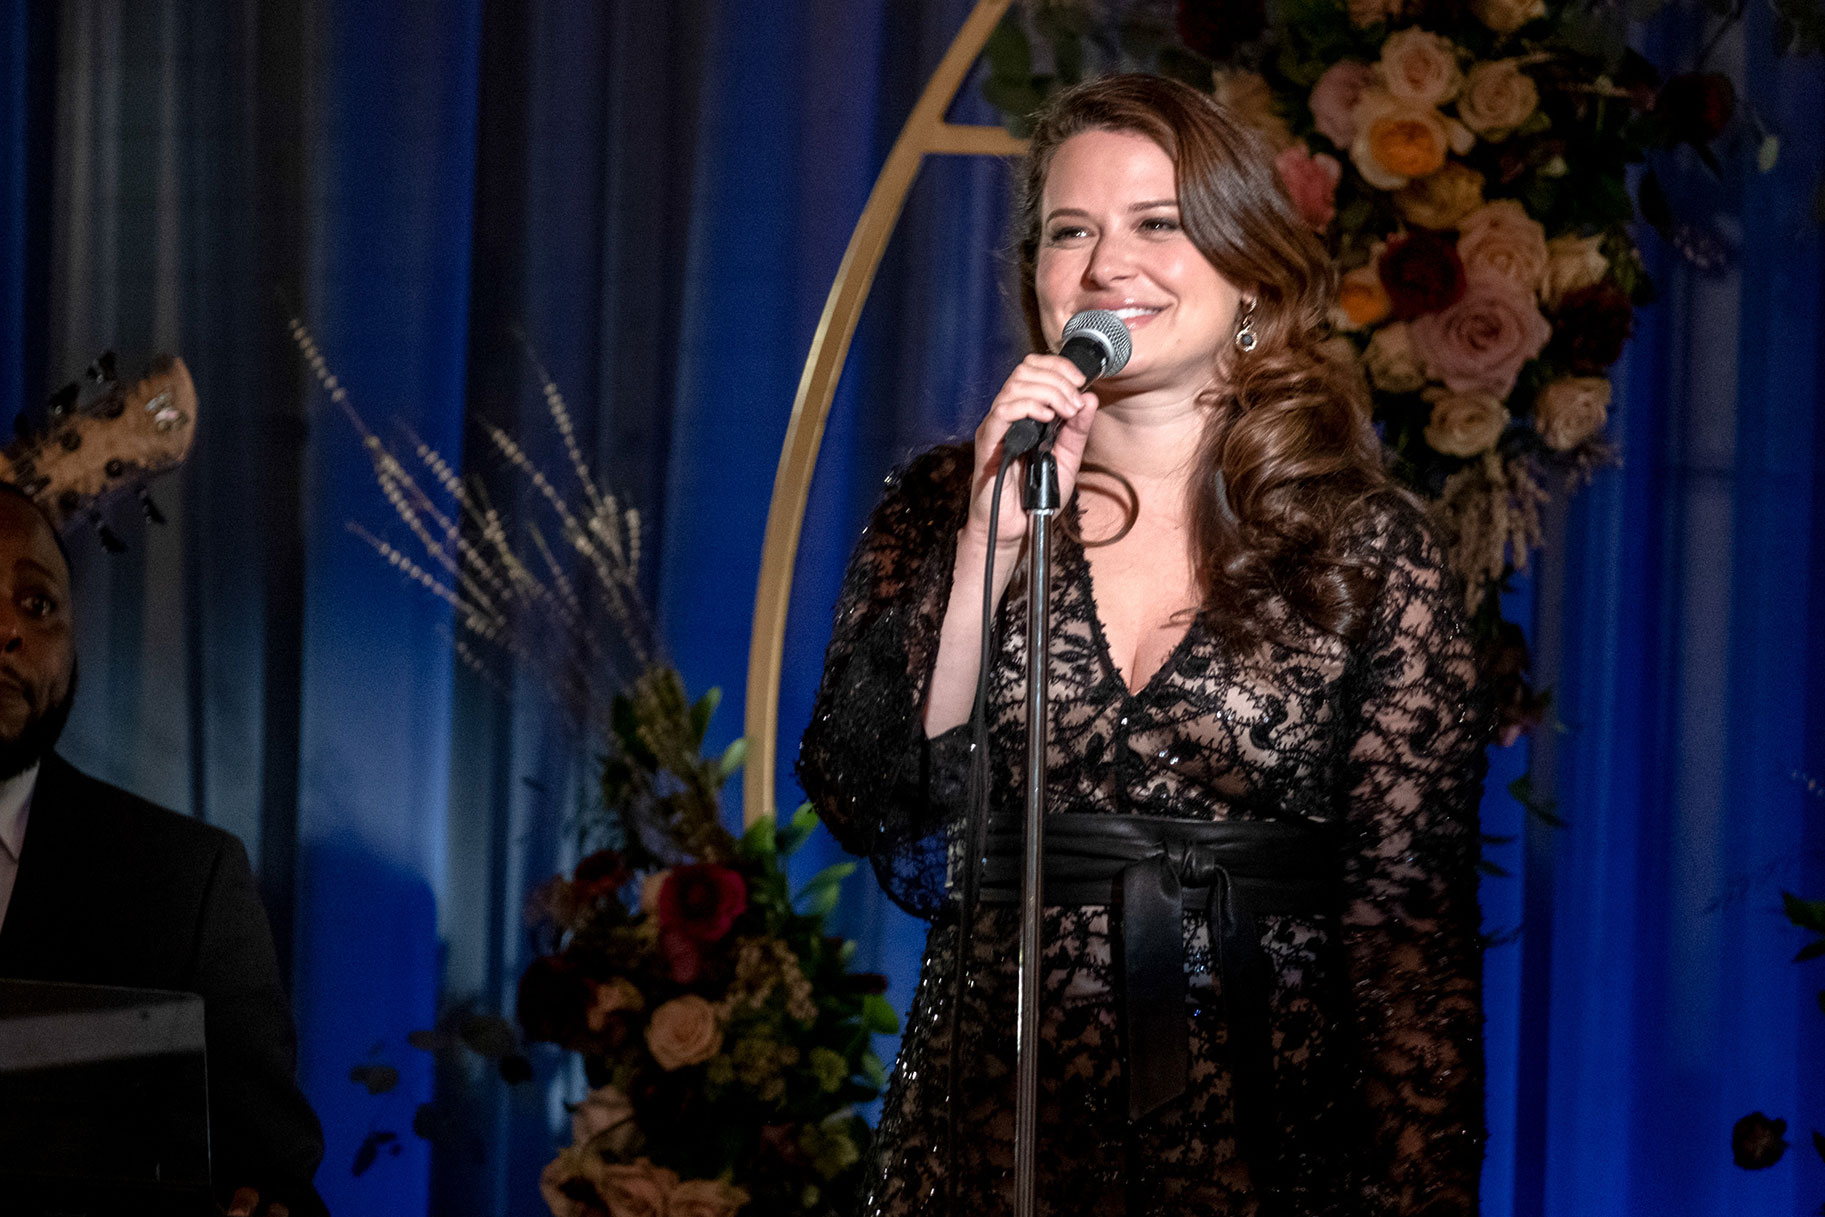 Katie Lowes as Arielle, Singing At Kate's Wedding